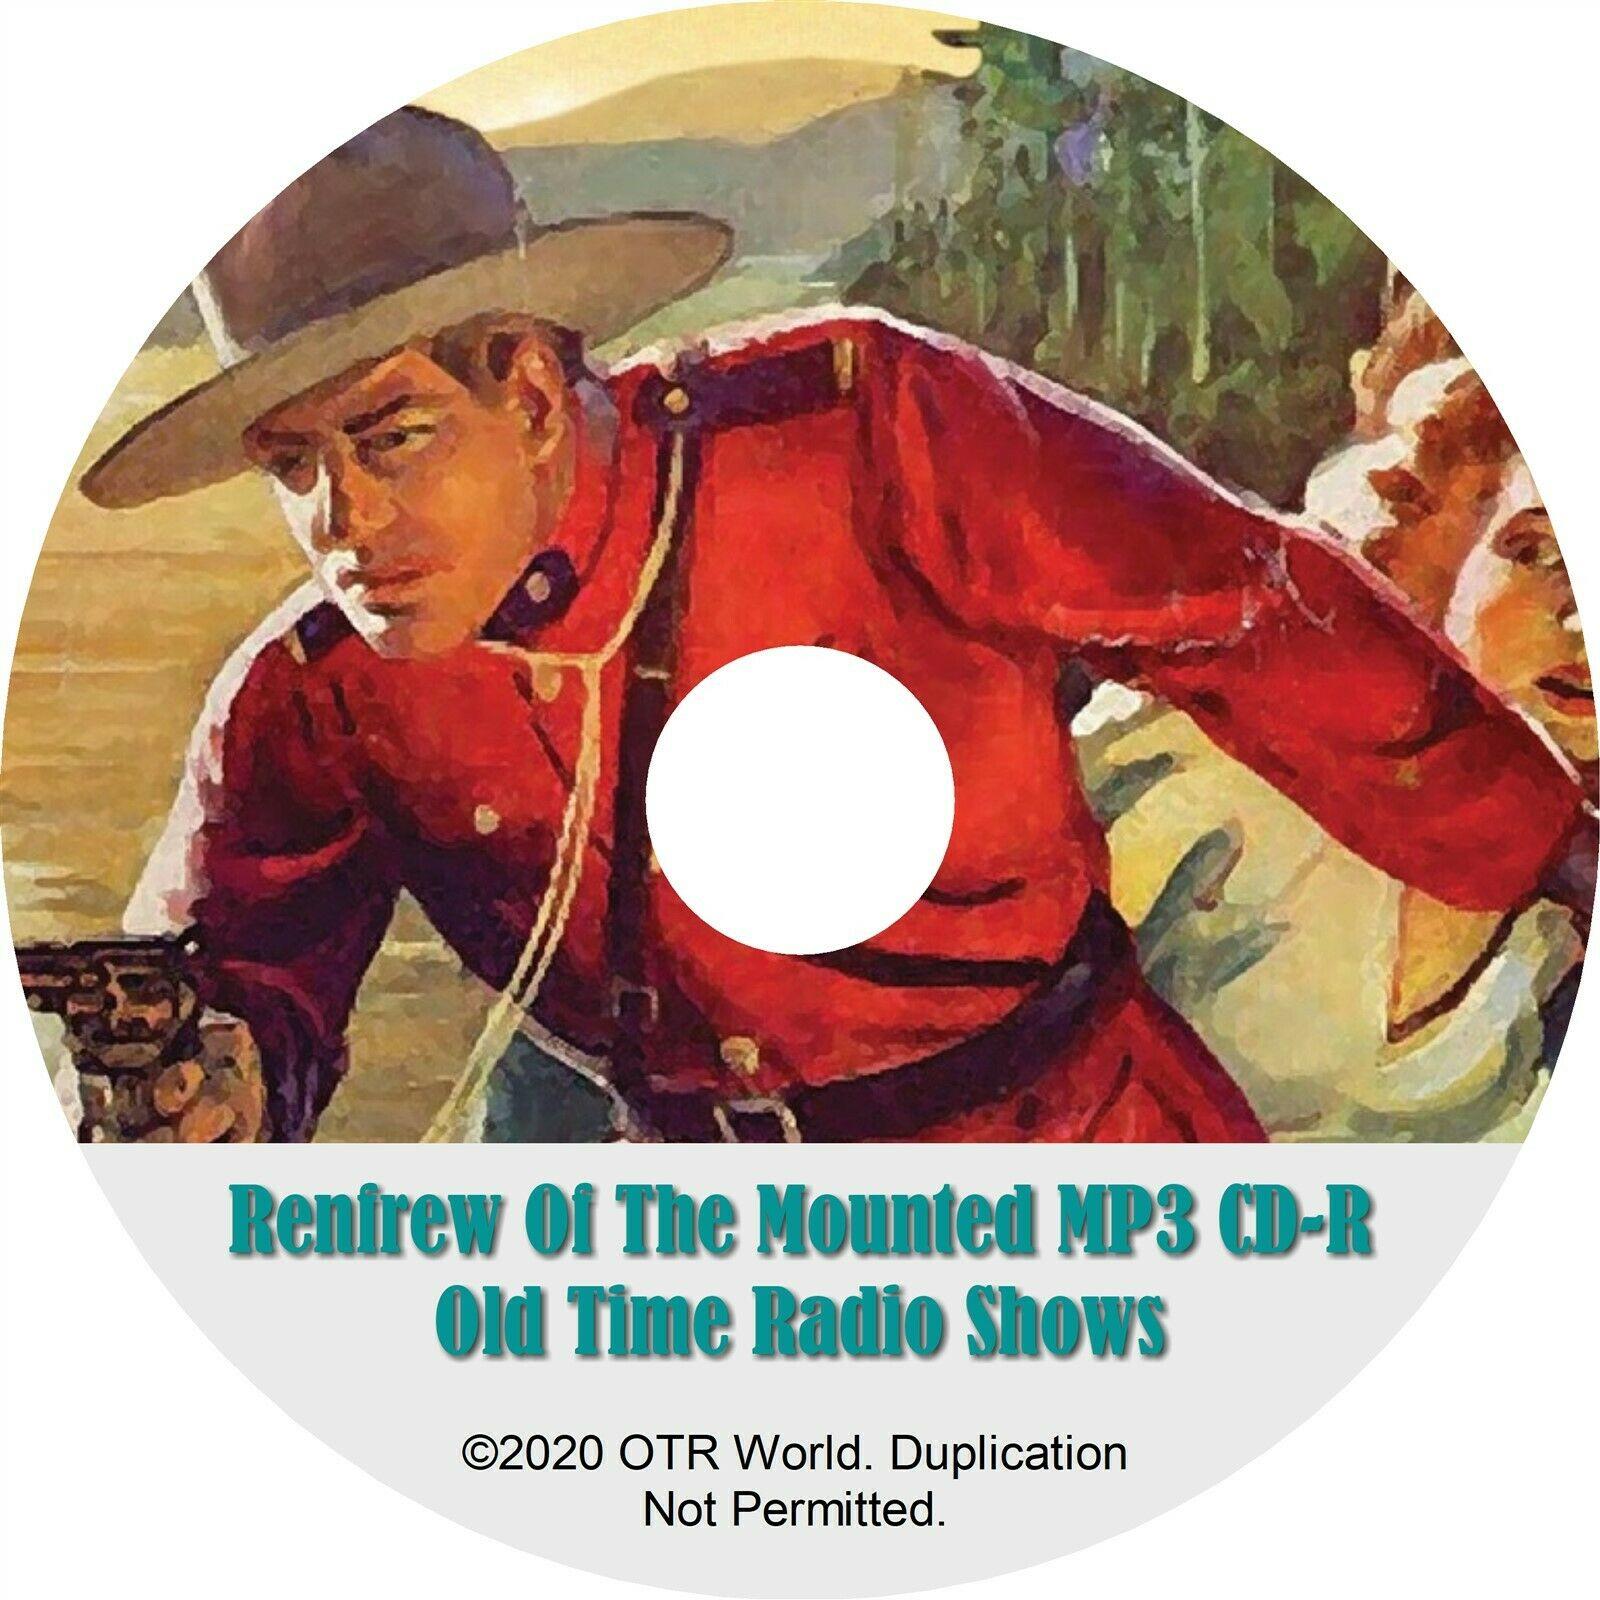 Renfrew Of The Mounted Old Time Radio Shows 2 Episodes OTR OTRS On MP3 CD-R